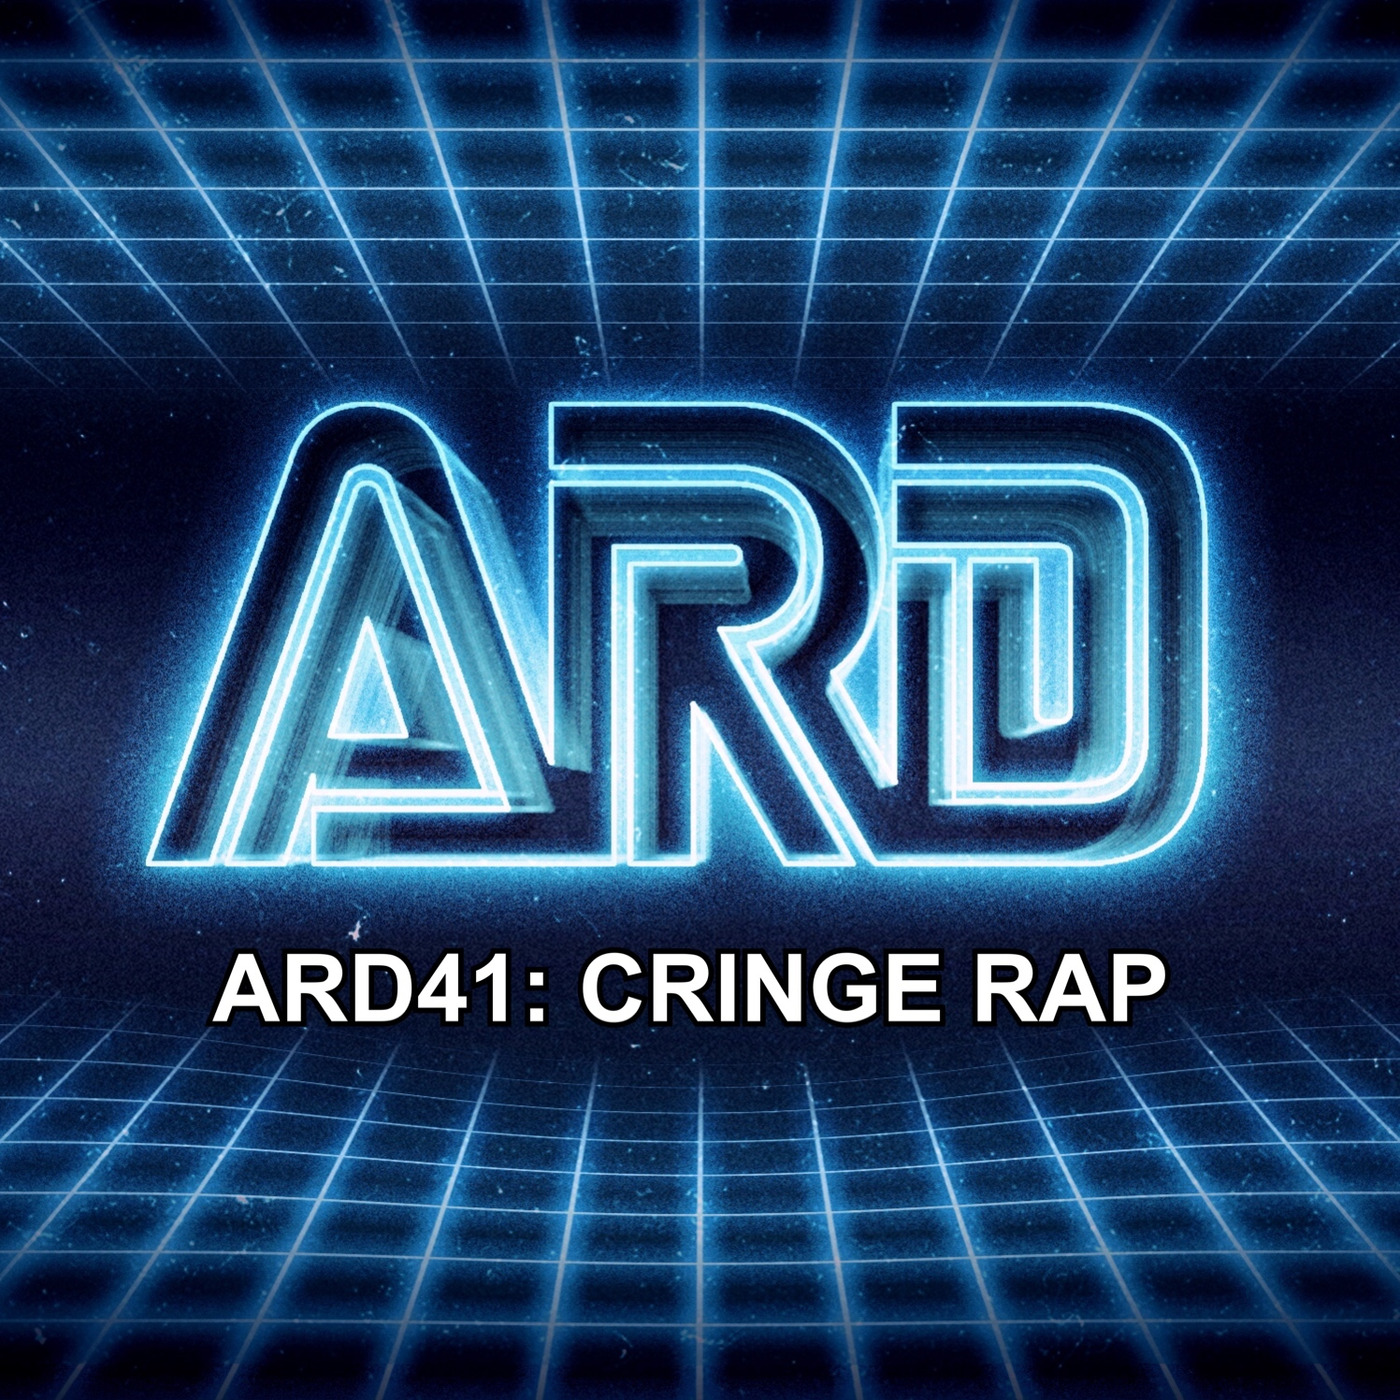 ARD EP 41: CRINGE RAP (We went through that so hopefully you wouldn't have to go through that)